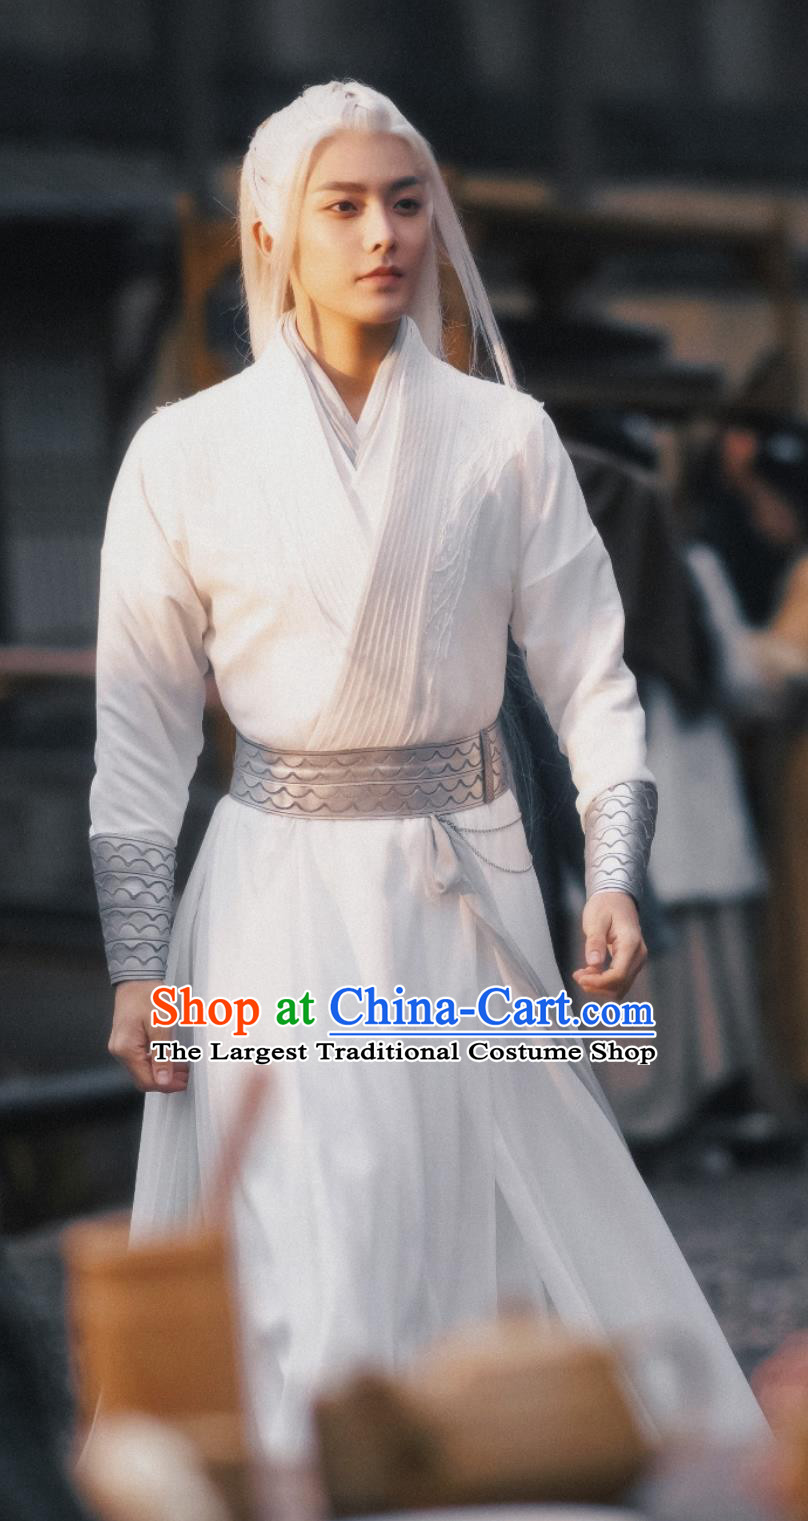 China Traditional Wuxia Costume 2023 TV Series Back From The Brink Prince Tian Yao White Outfit Ancient Chinese Super Hero Clothing